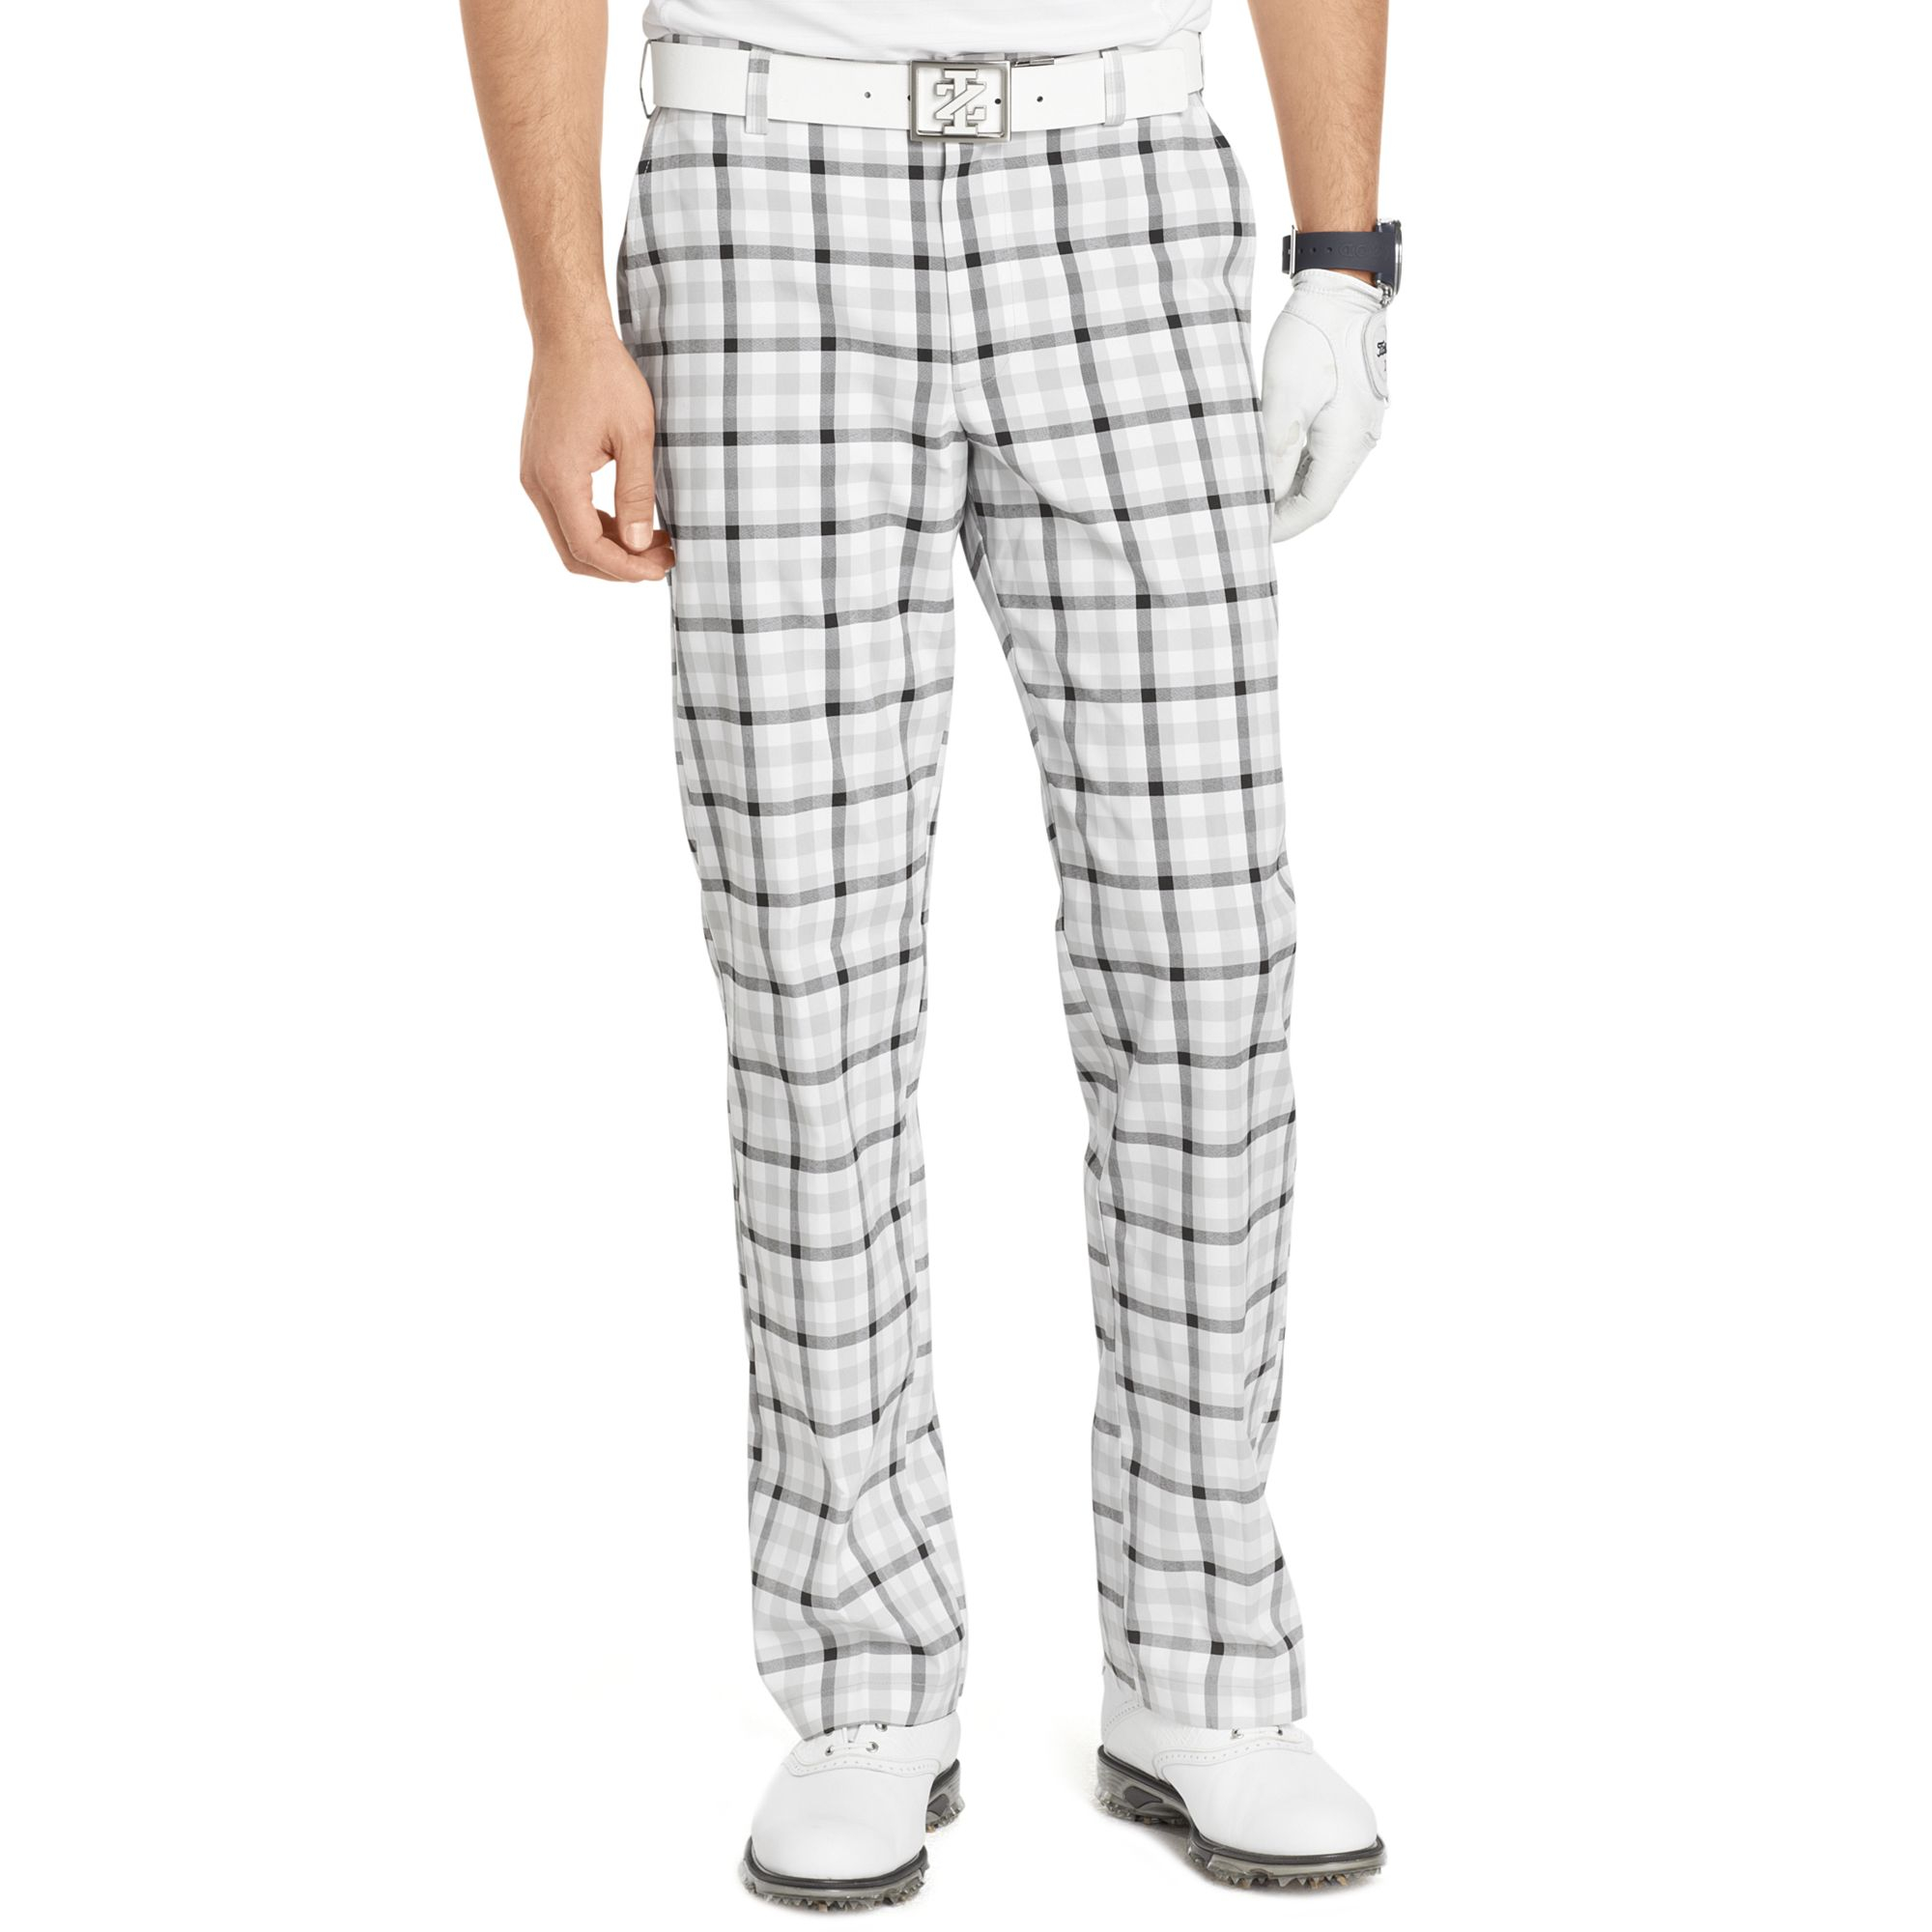 Izod Flat Front Plaid Golf Pants in Gray for Men - Lyst